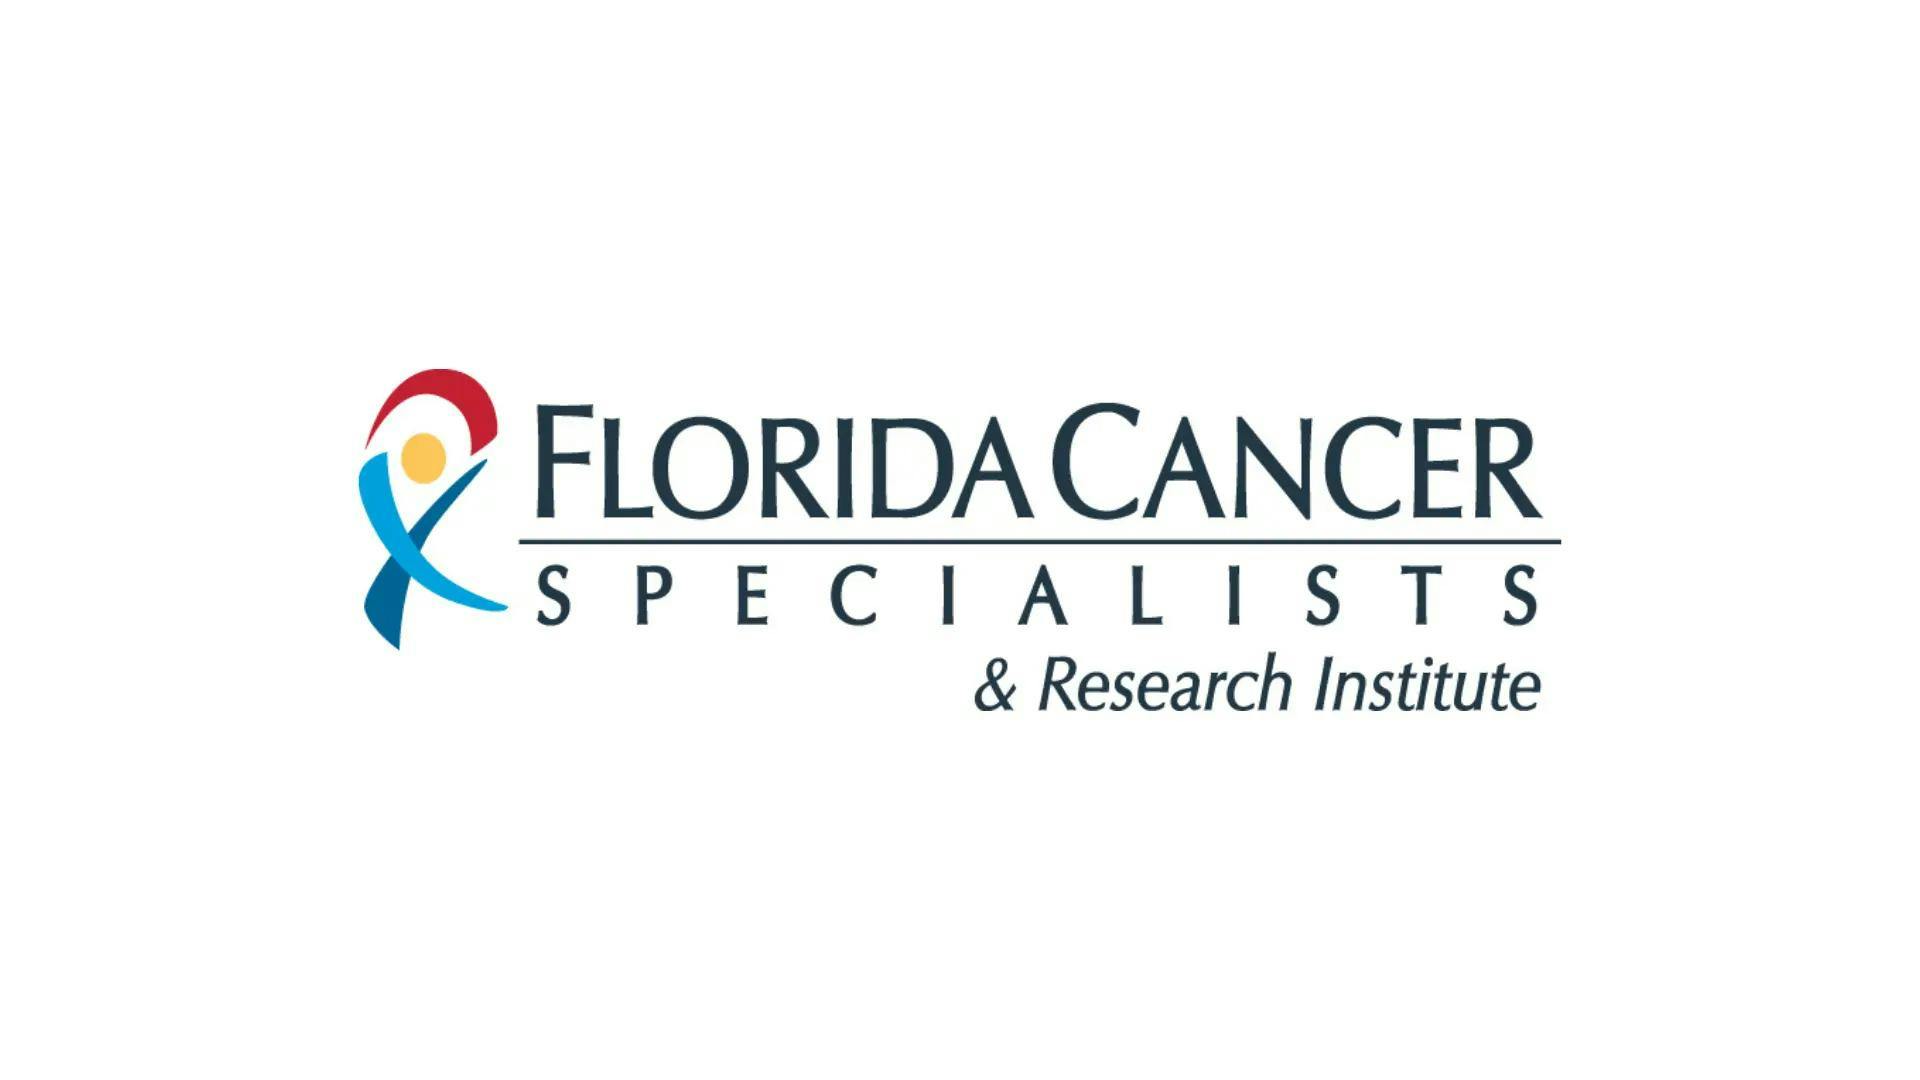 Florida Cancer Specialists & Research Institute Expands Access To Cancer Care in Volusia County